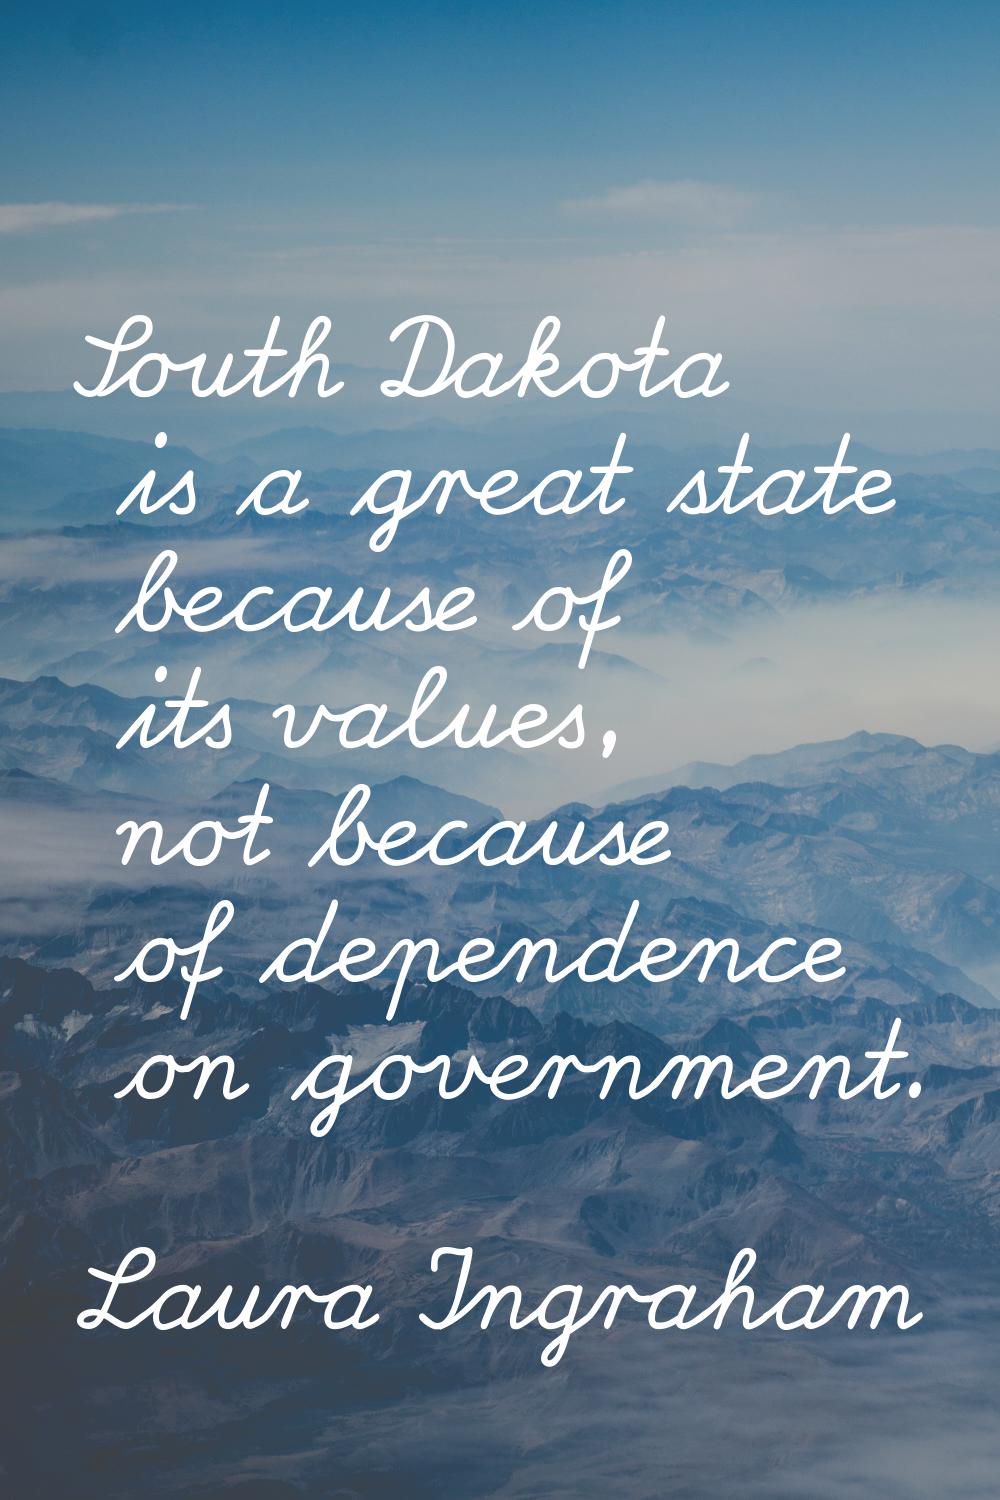 South Dakota is a great state because of its values, not because of dependence on government.